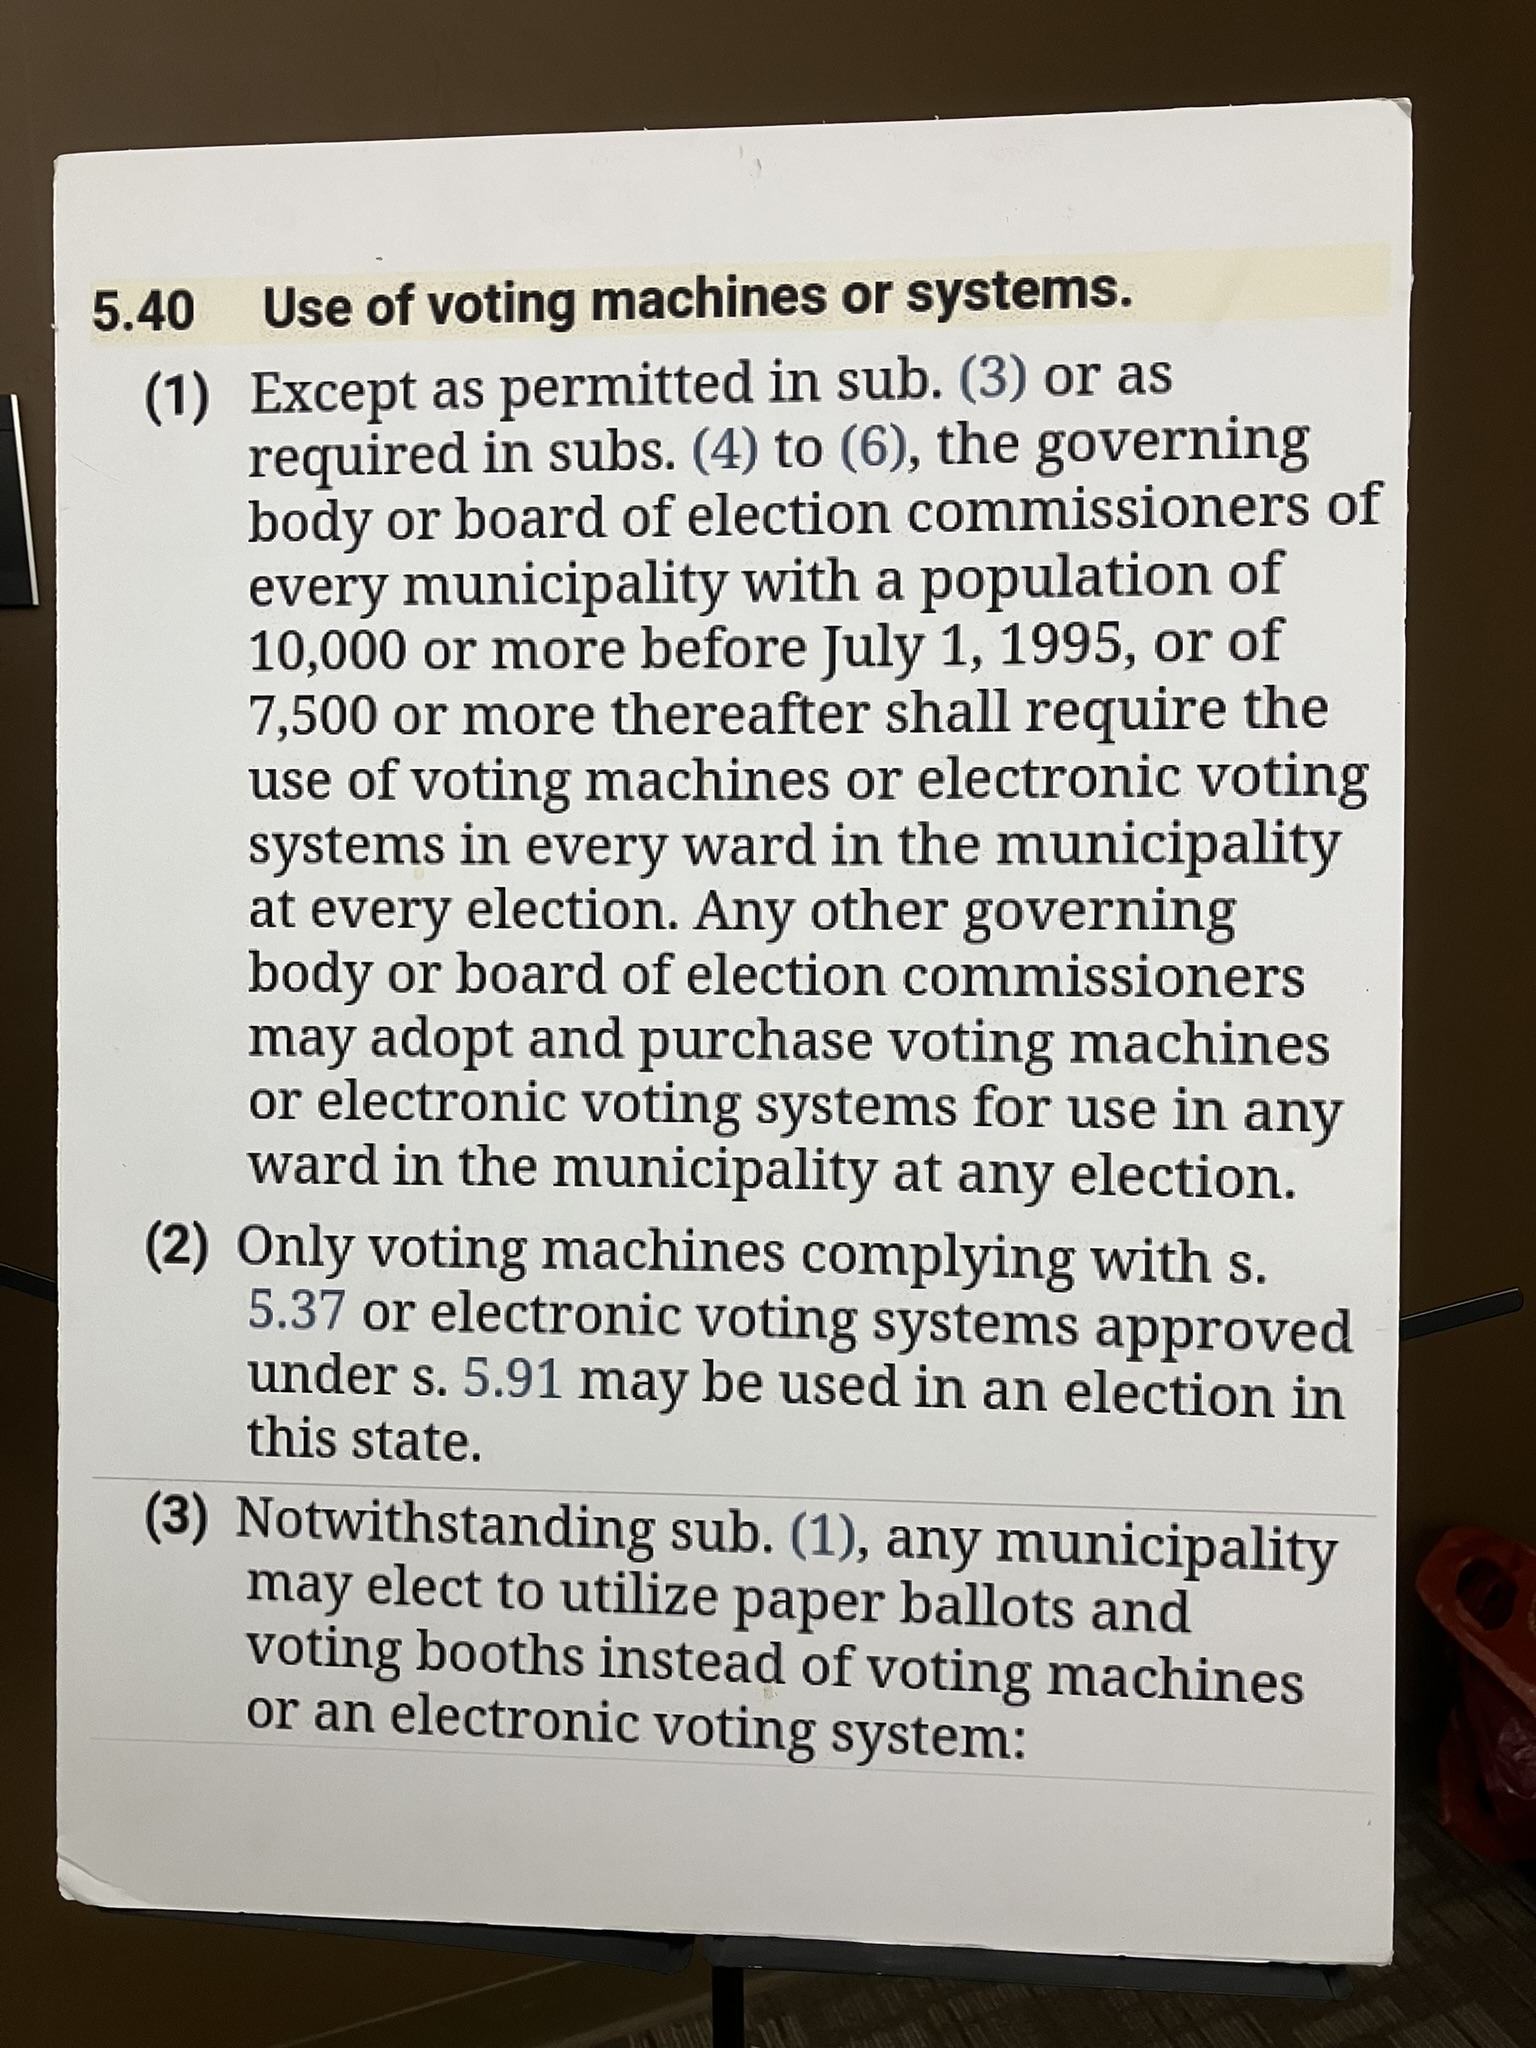 The text of the Wisconsin state statute addressing the use of voting machines.